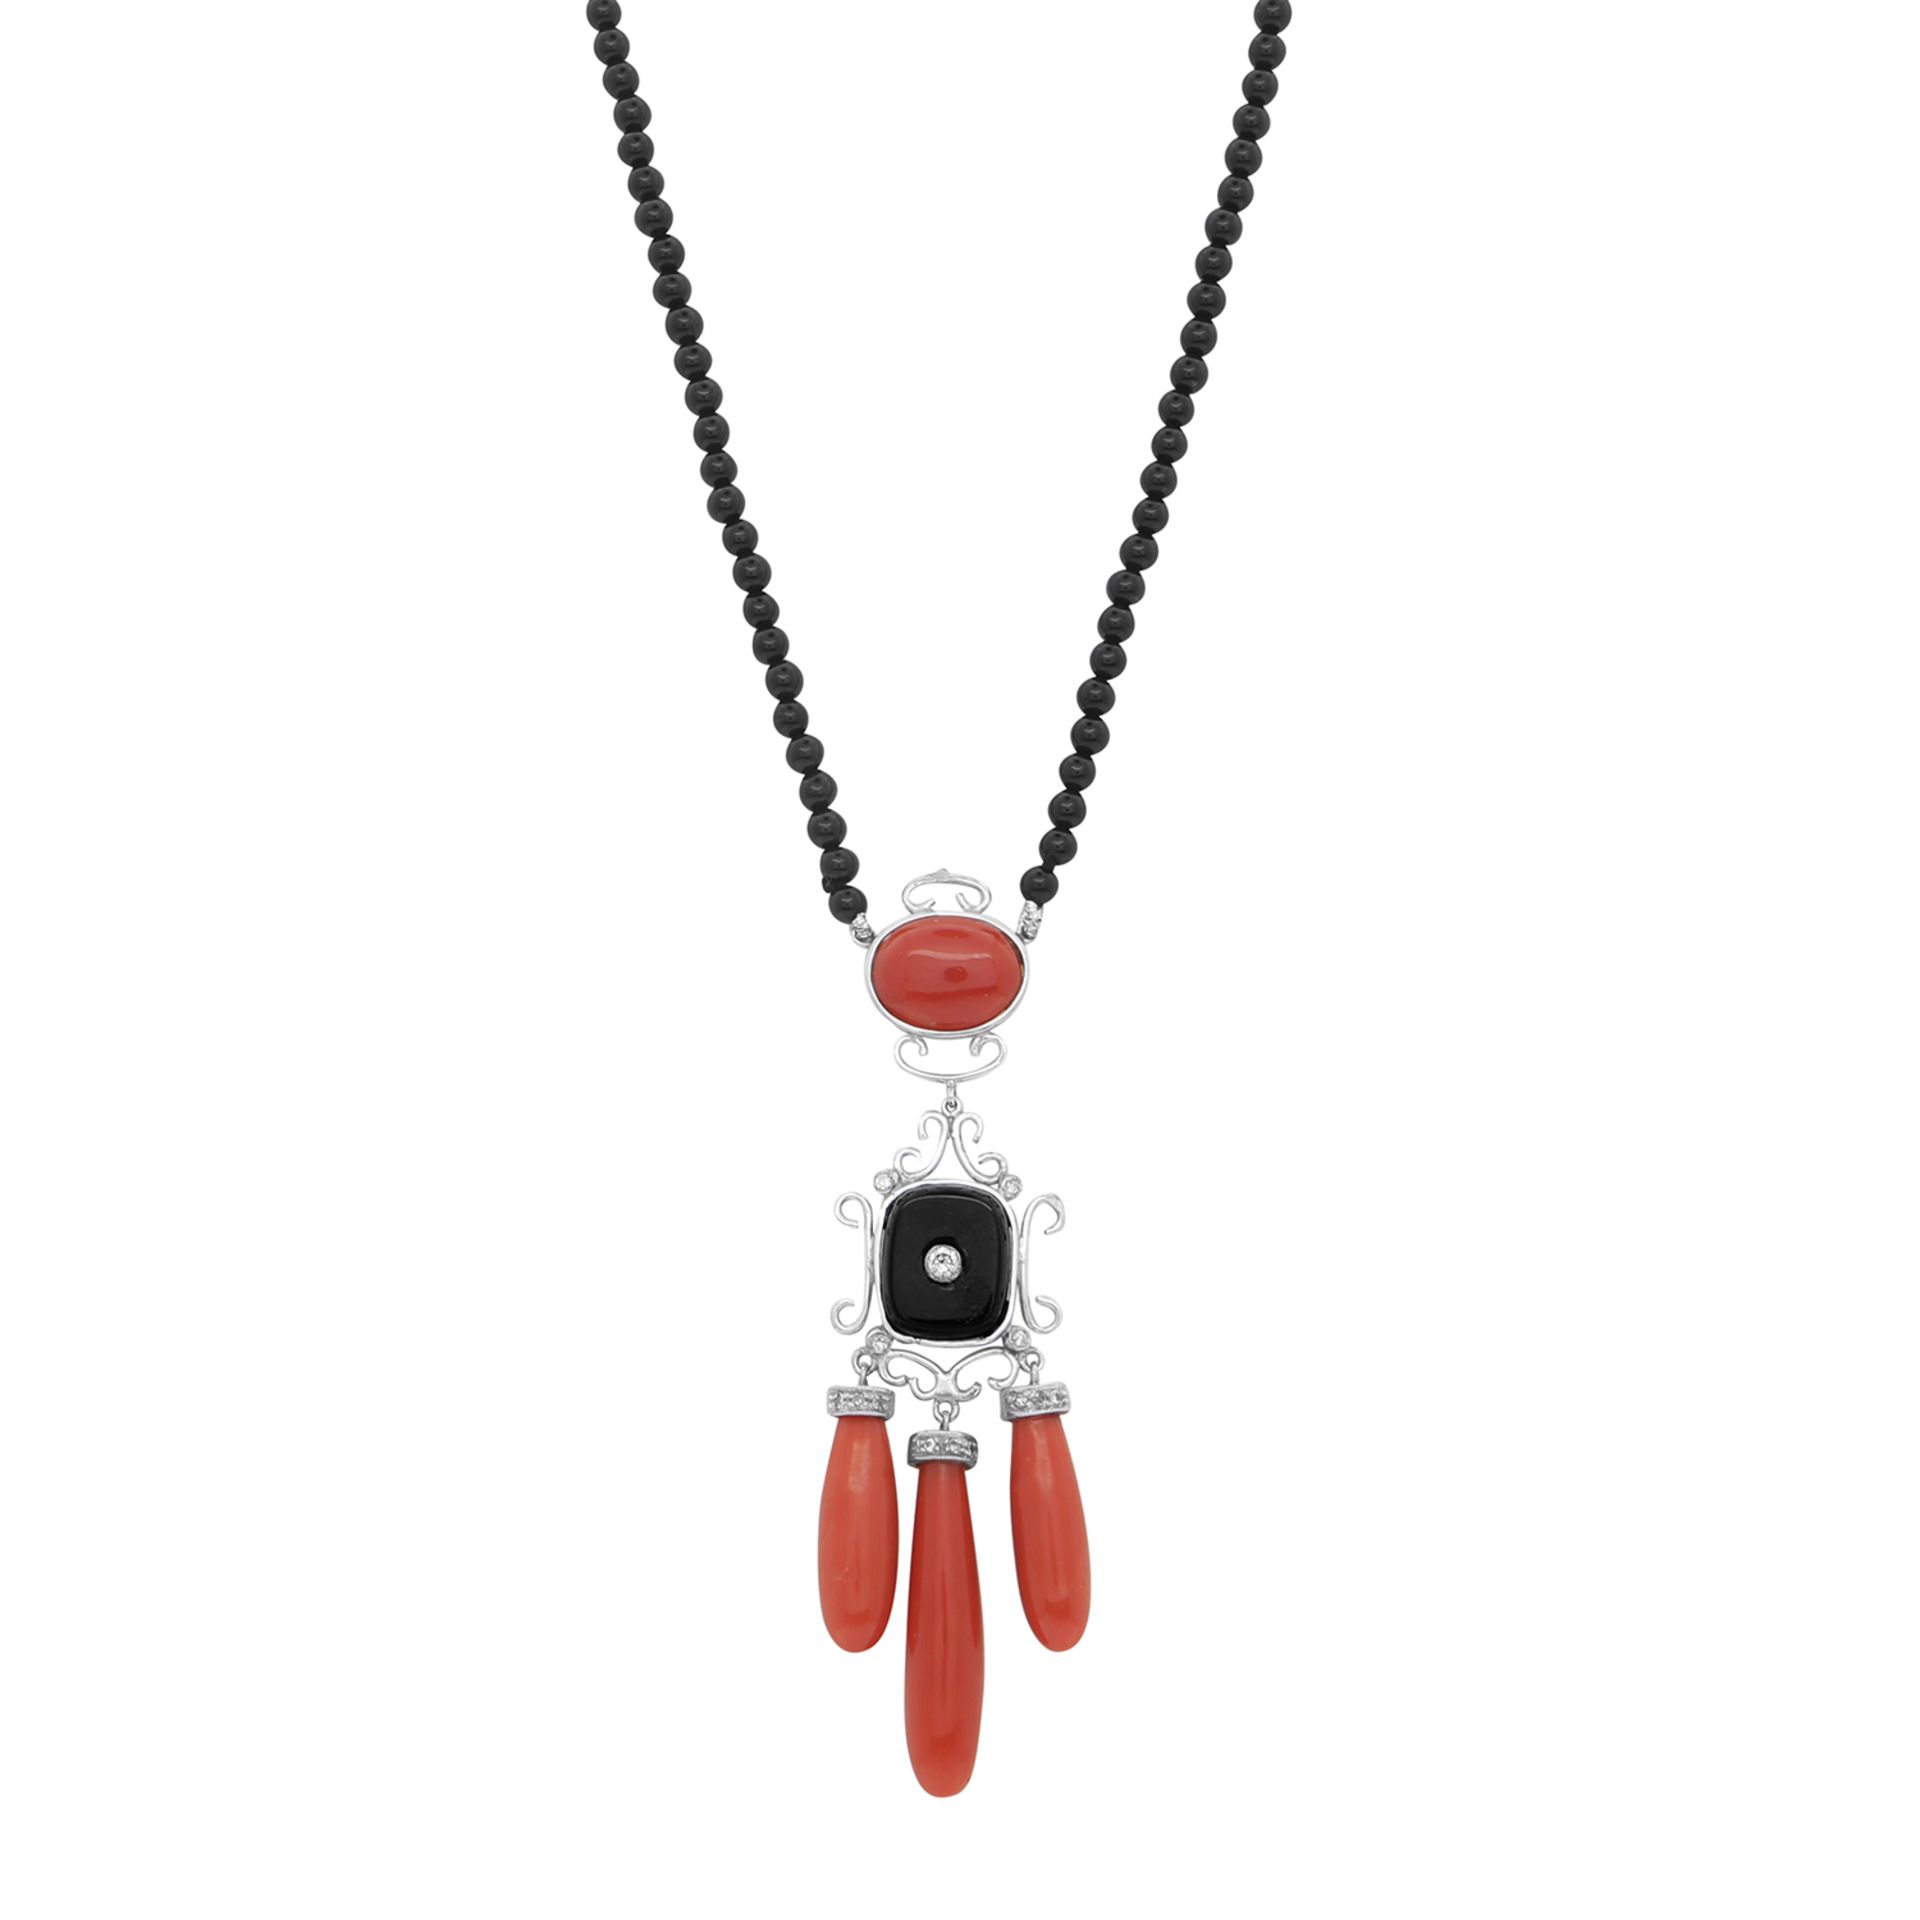 AN ART DECO ONYX, CORAL AND DIAMOND NECKLACE in 18ct white gold, the onyx bead necklace with a coral